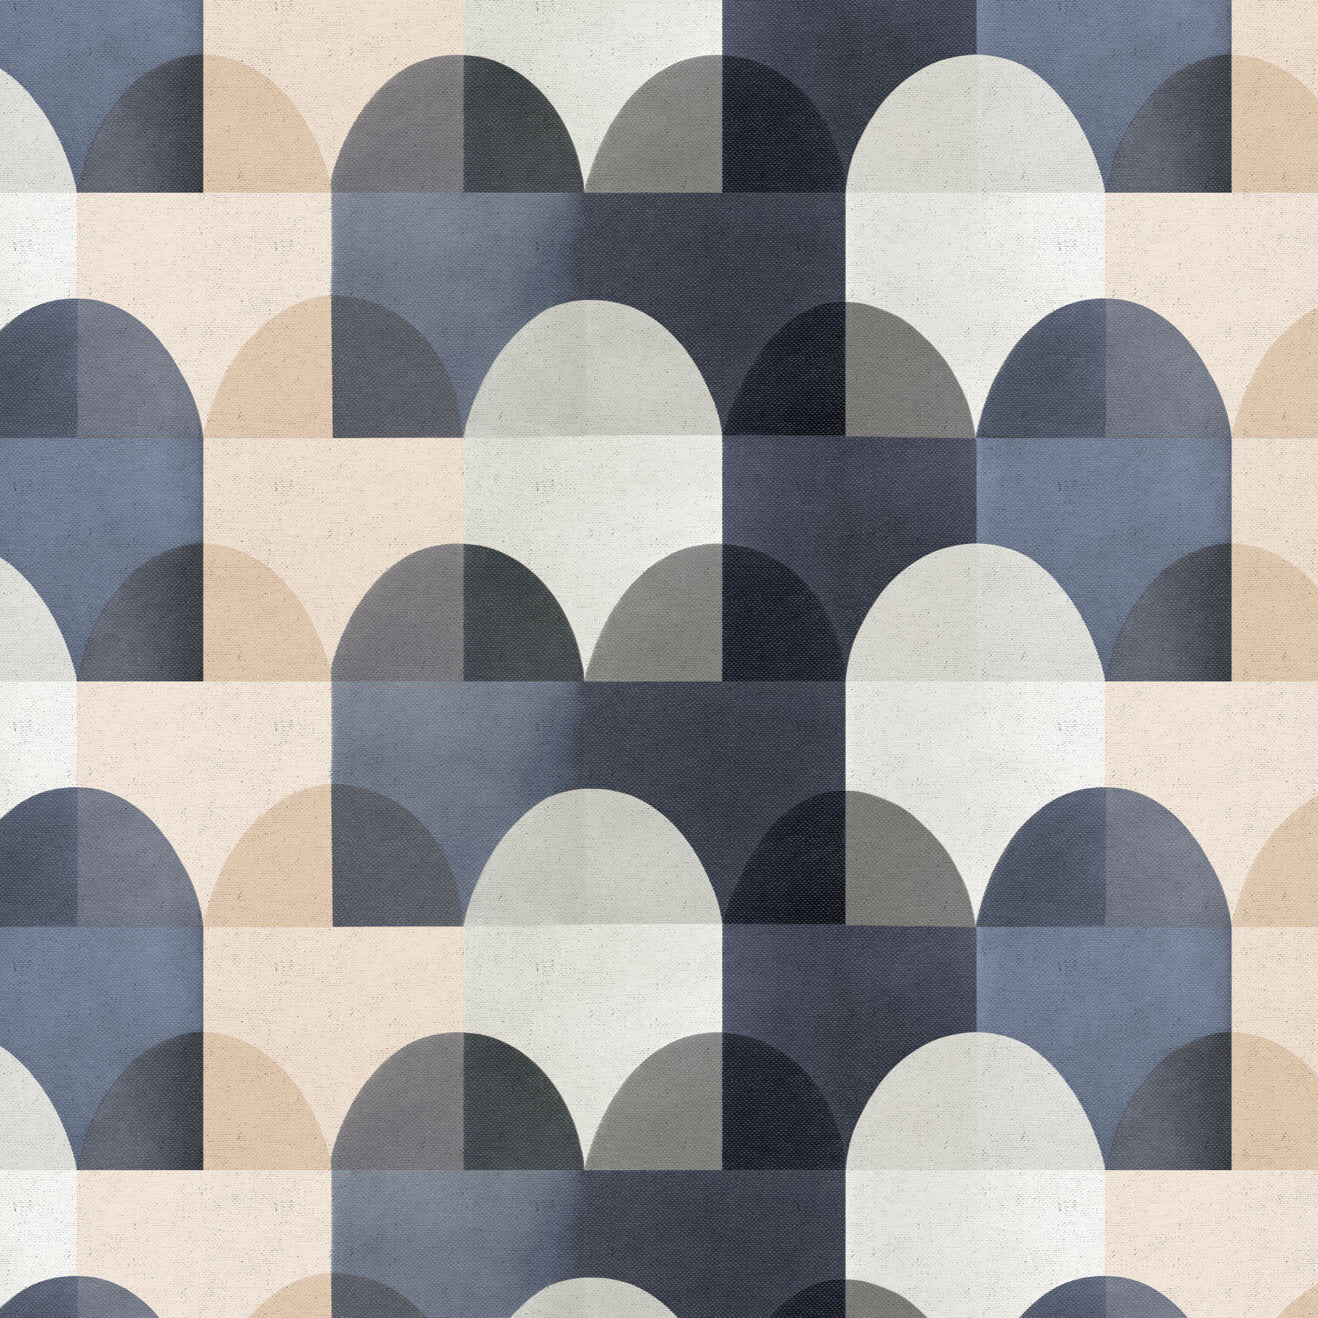 Detail of fabric in a curvy geometric print in shades of white, cream, gray and charcoal.